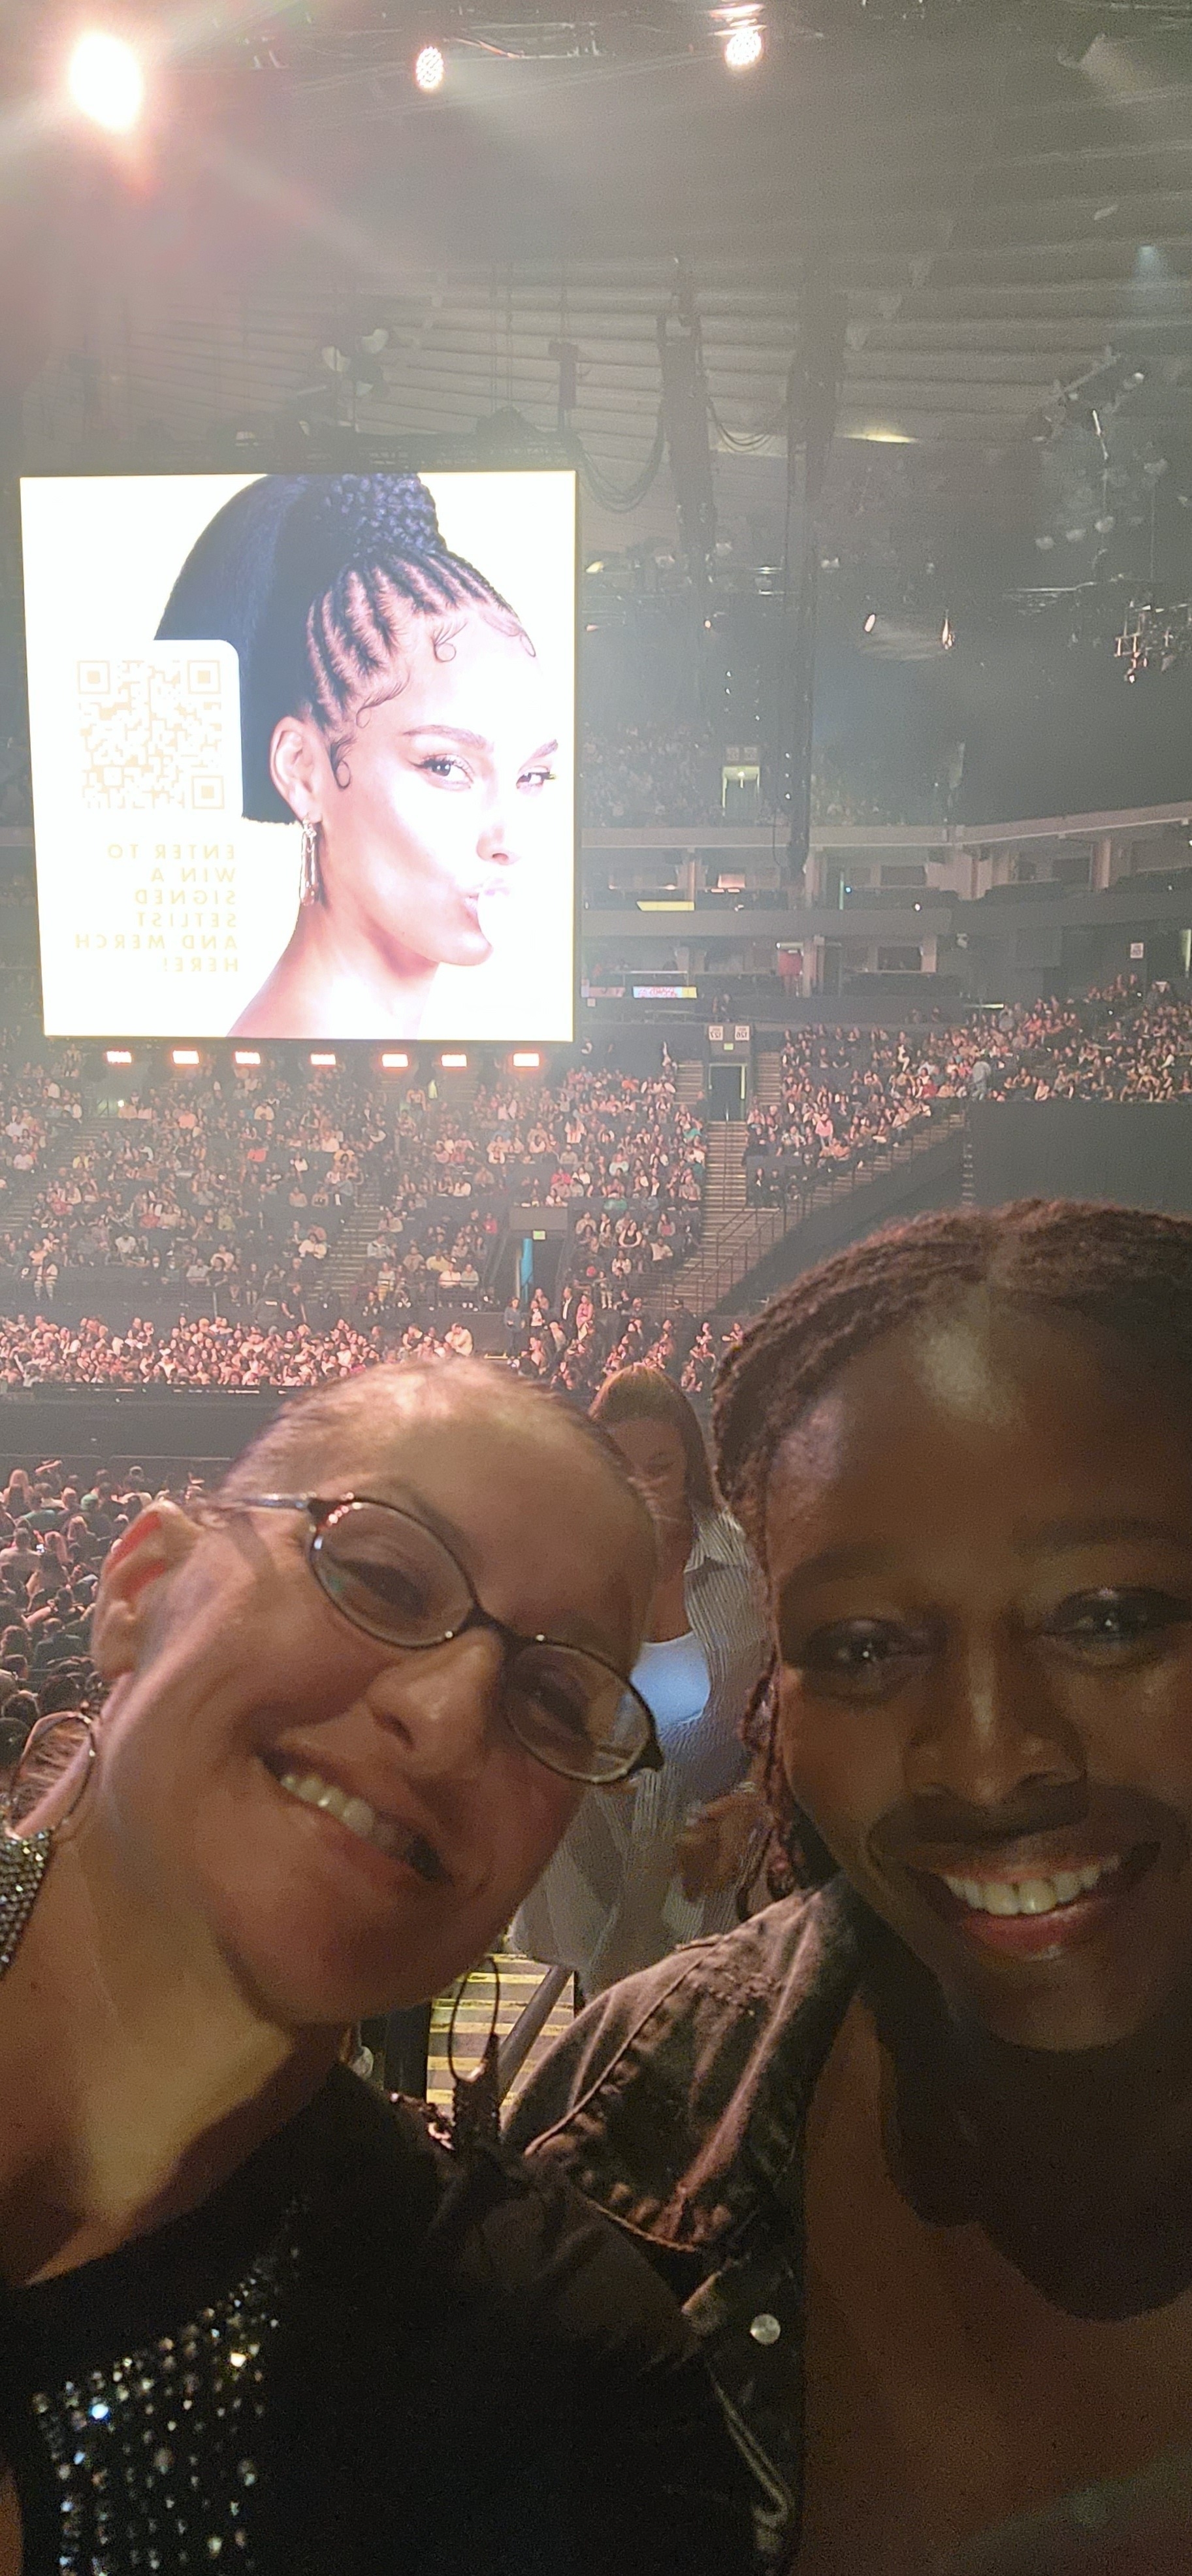 Alicia - Keys to the Summer Tour